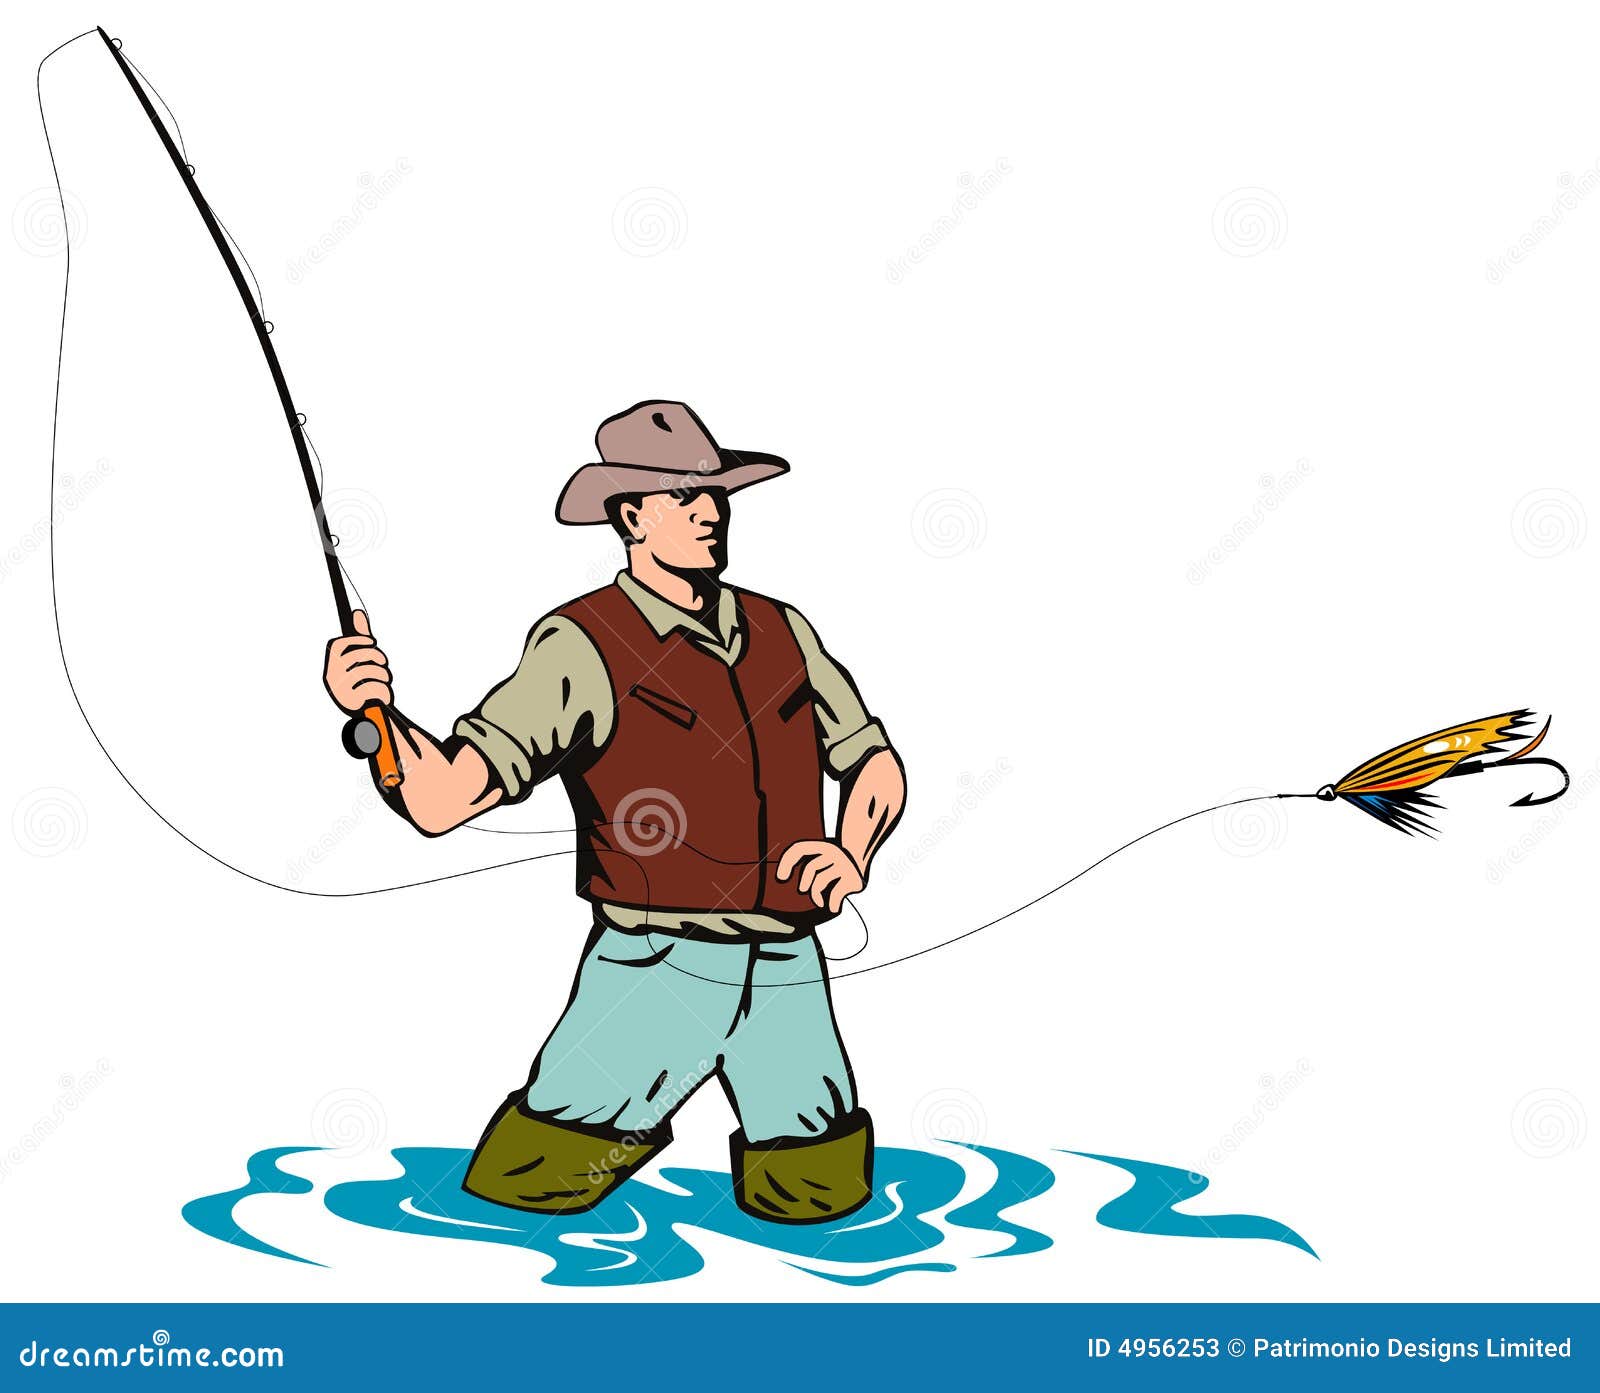 Fly Fisherman Catching A Trout Stock Photos - Image: 4956253